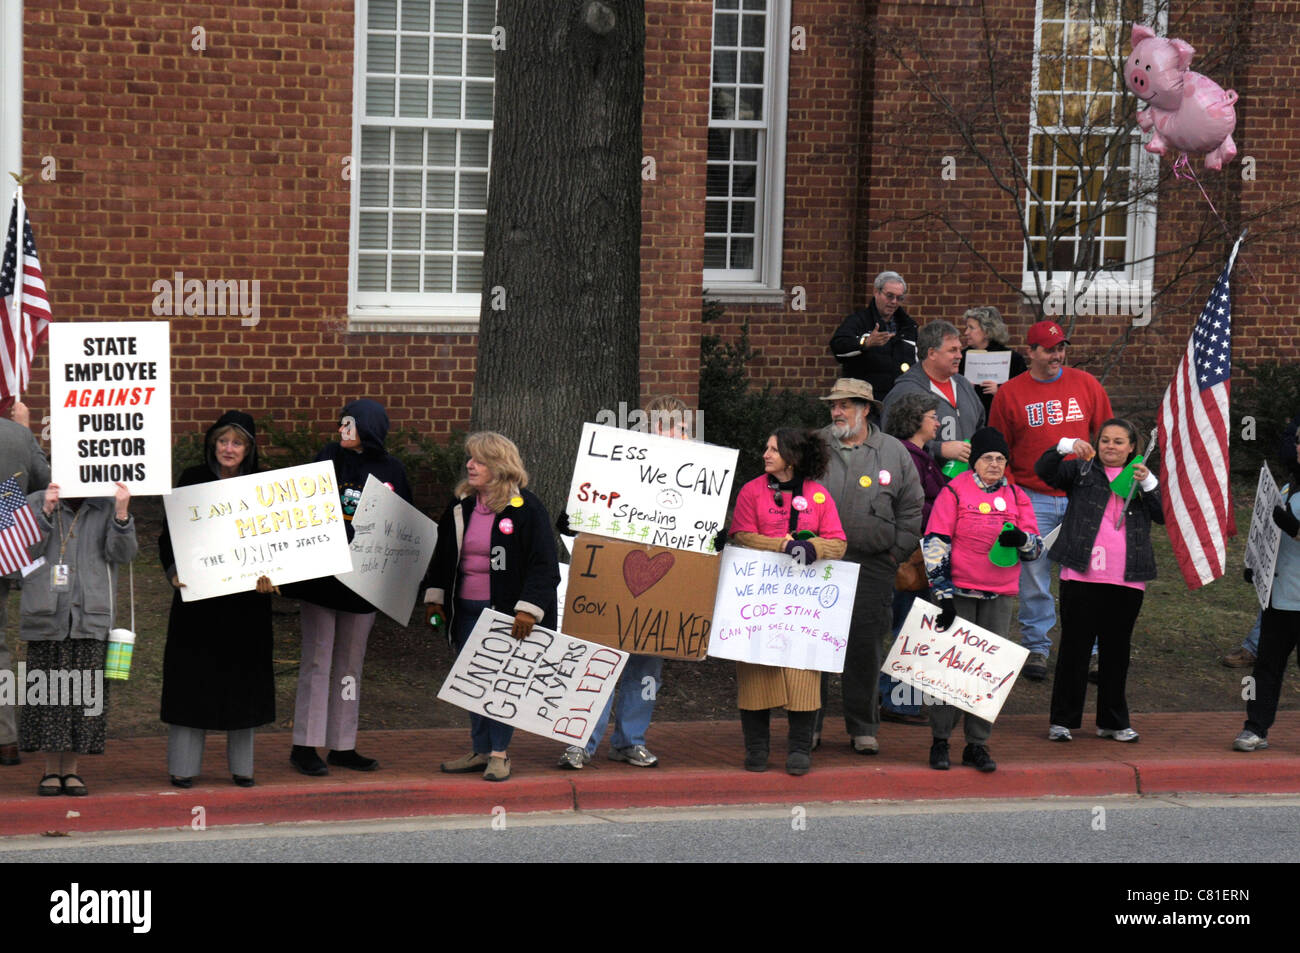 Anti union protesters in Annapolis, Maryland Stock Photo